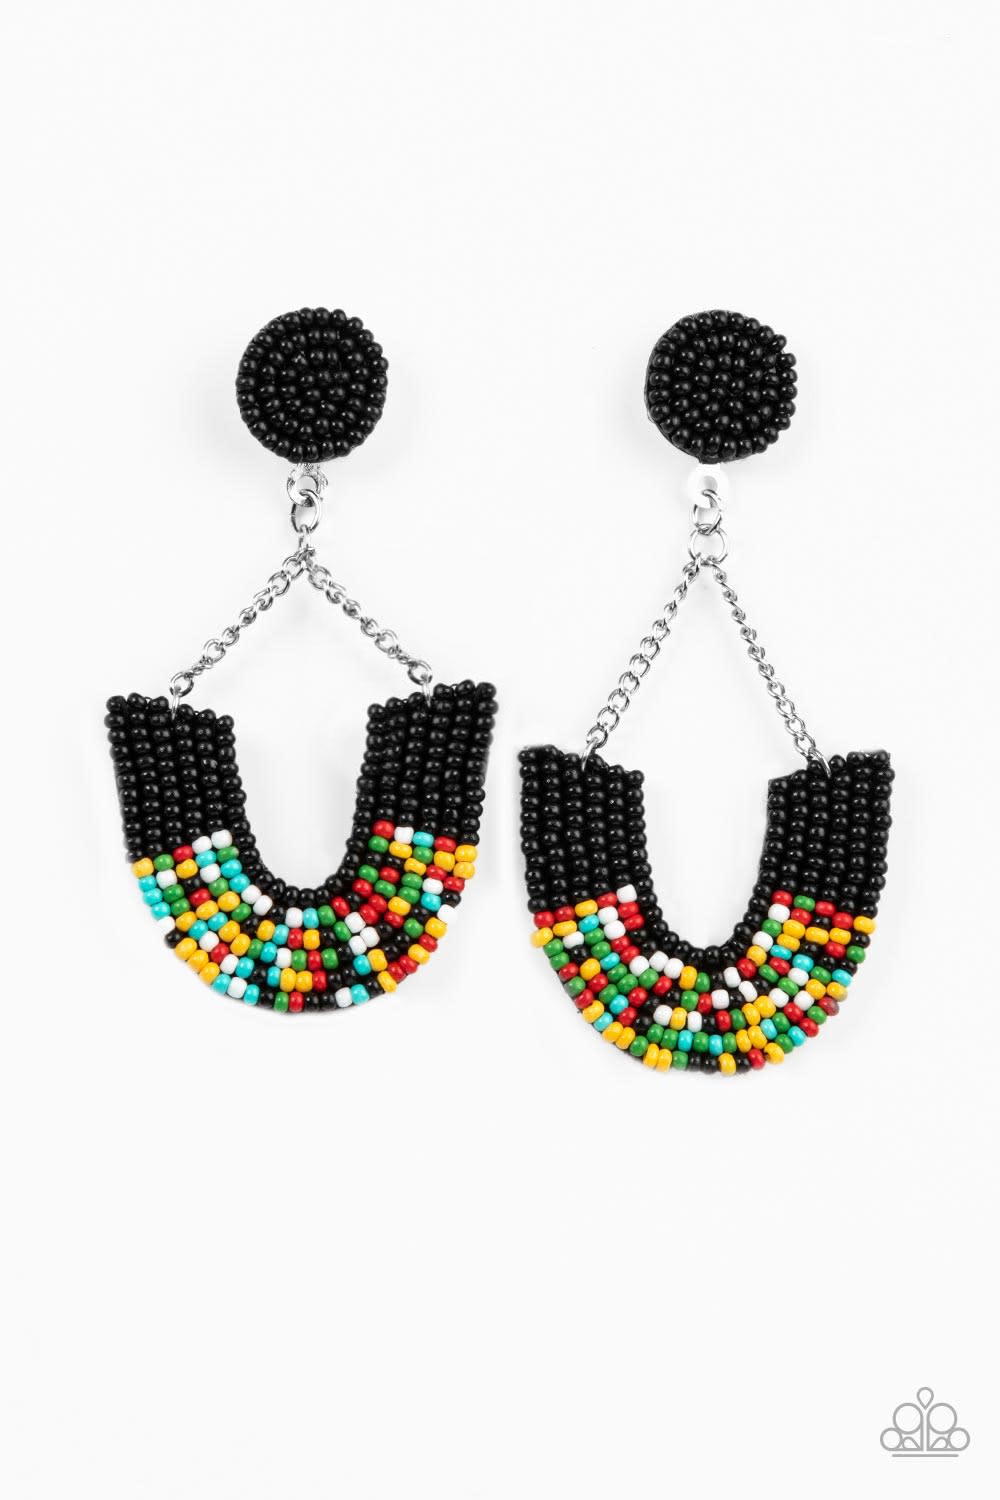 Make it RAINBOW - Black ***COMING SOON*** - Bling With Crystal